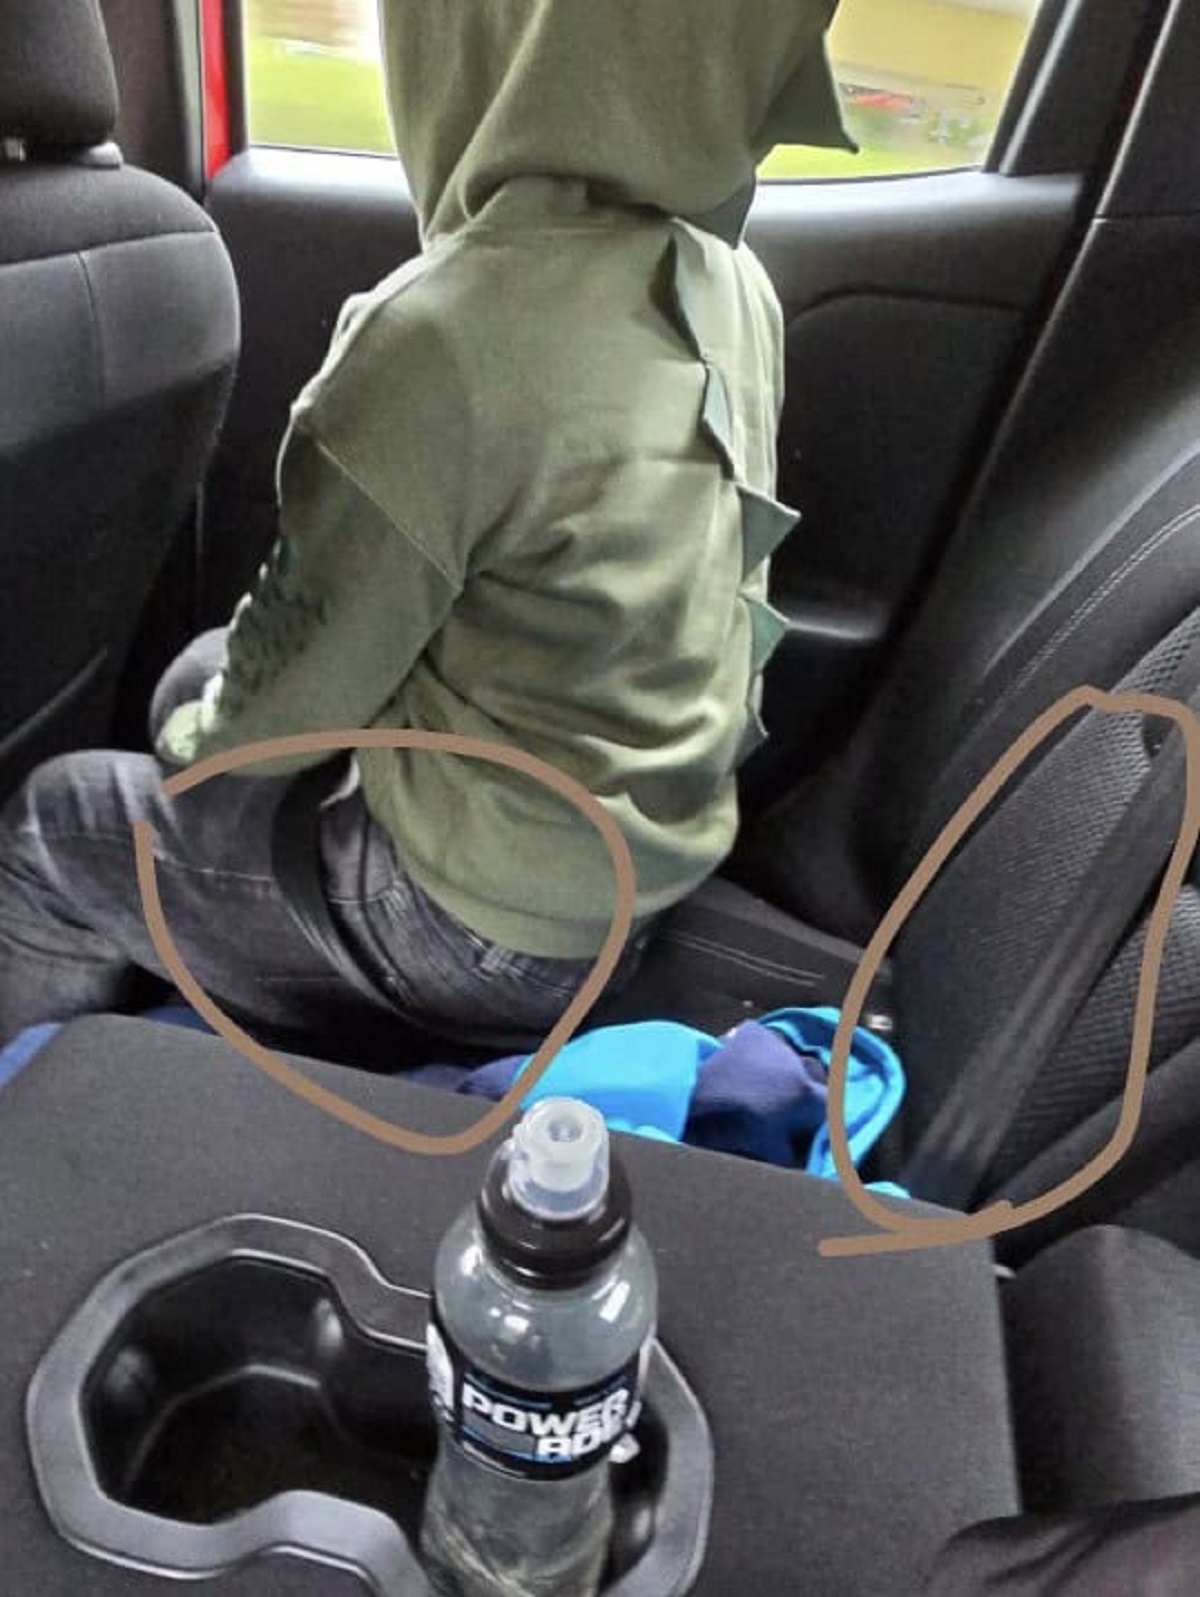 The way my brother’s gf son is allowed to sit in the car.